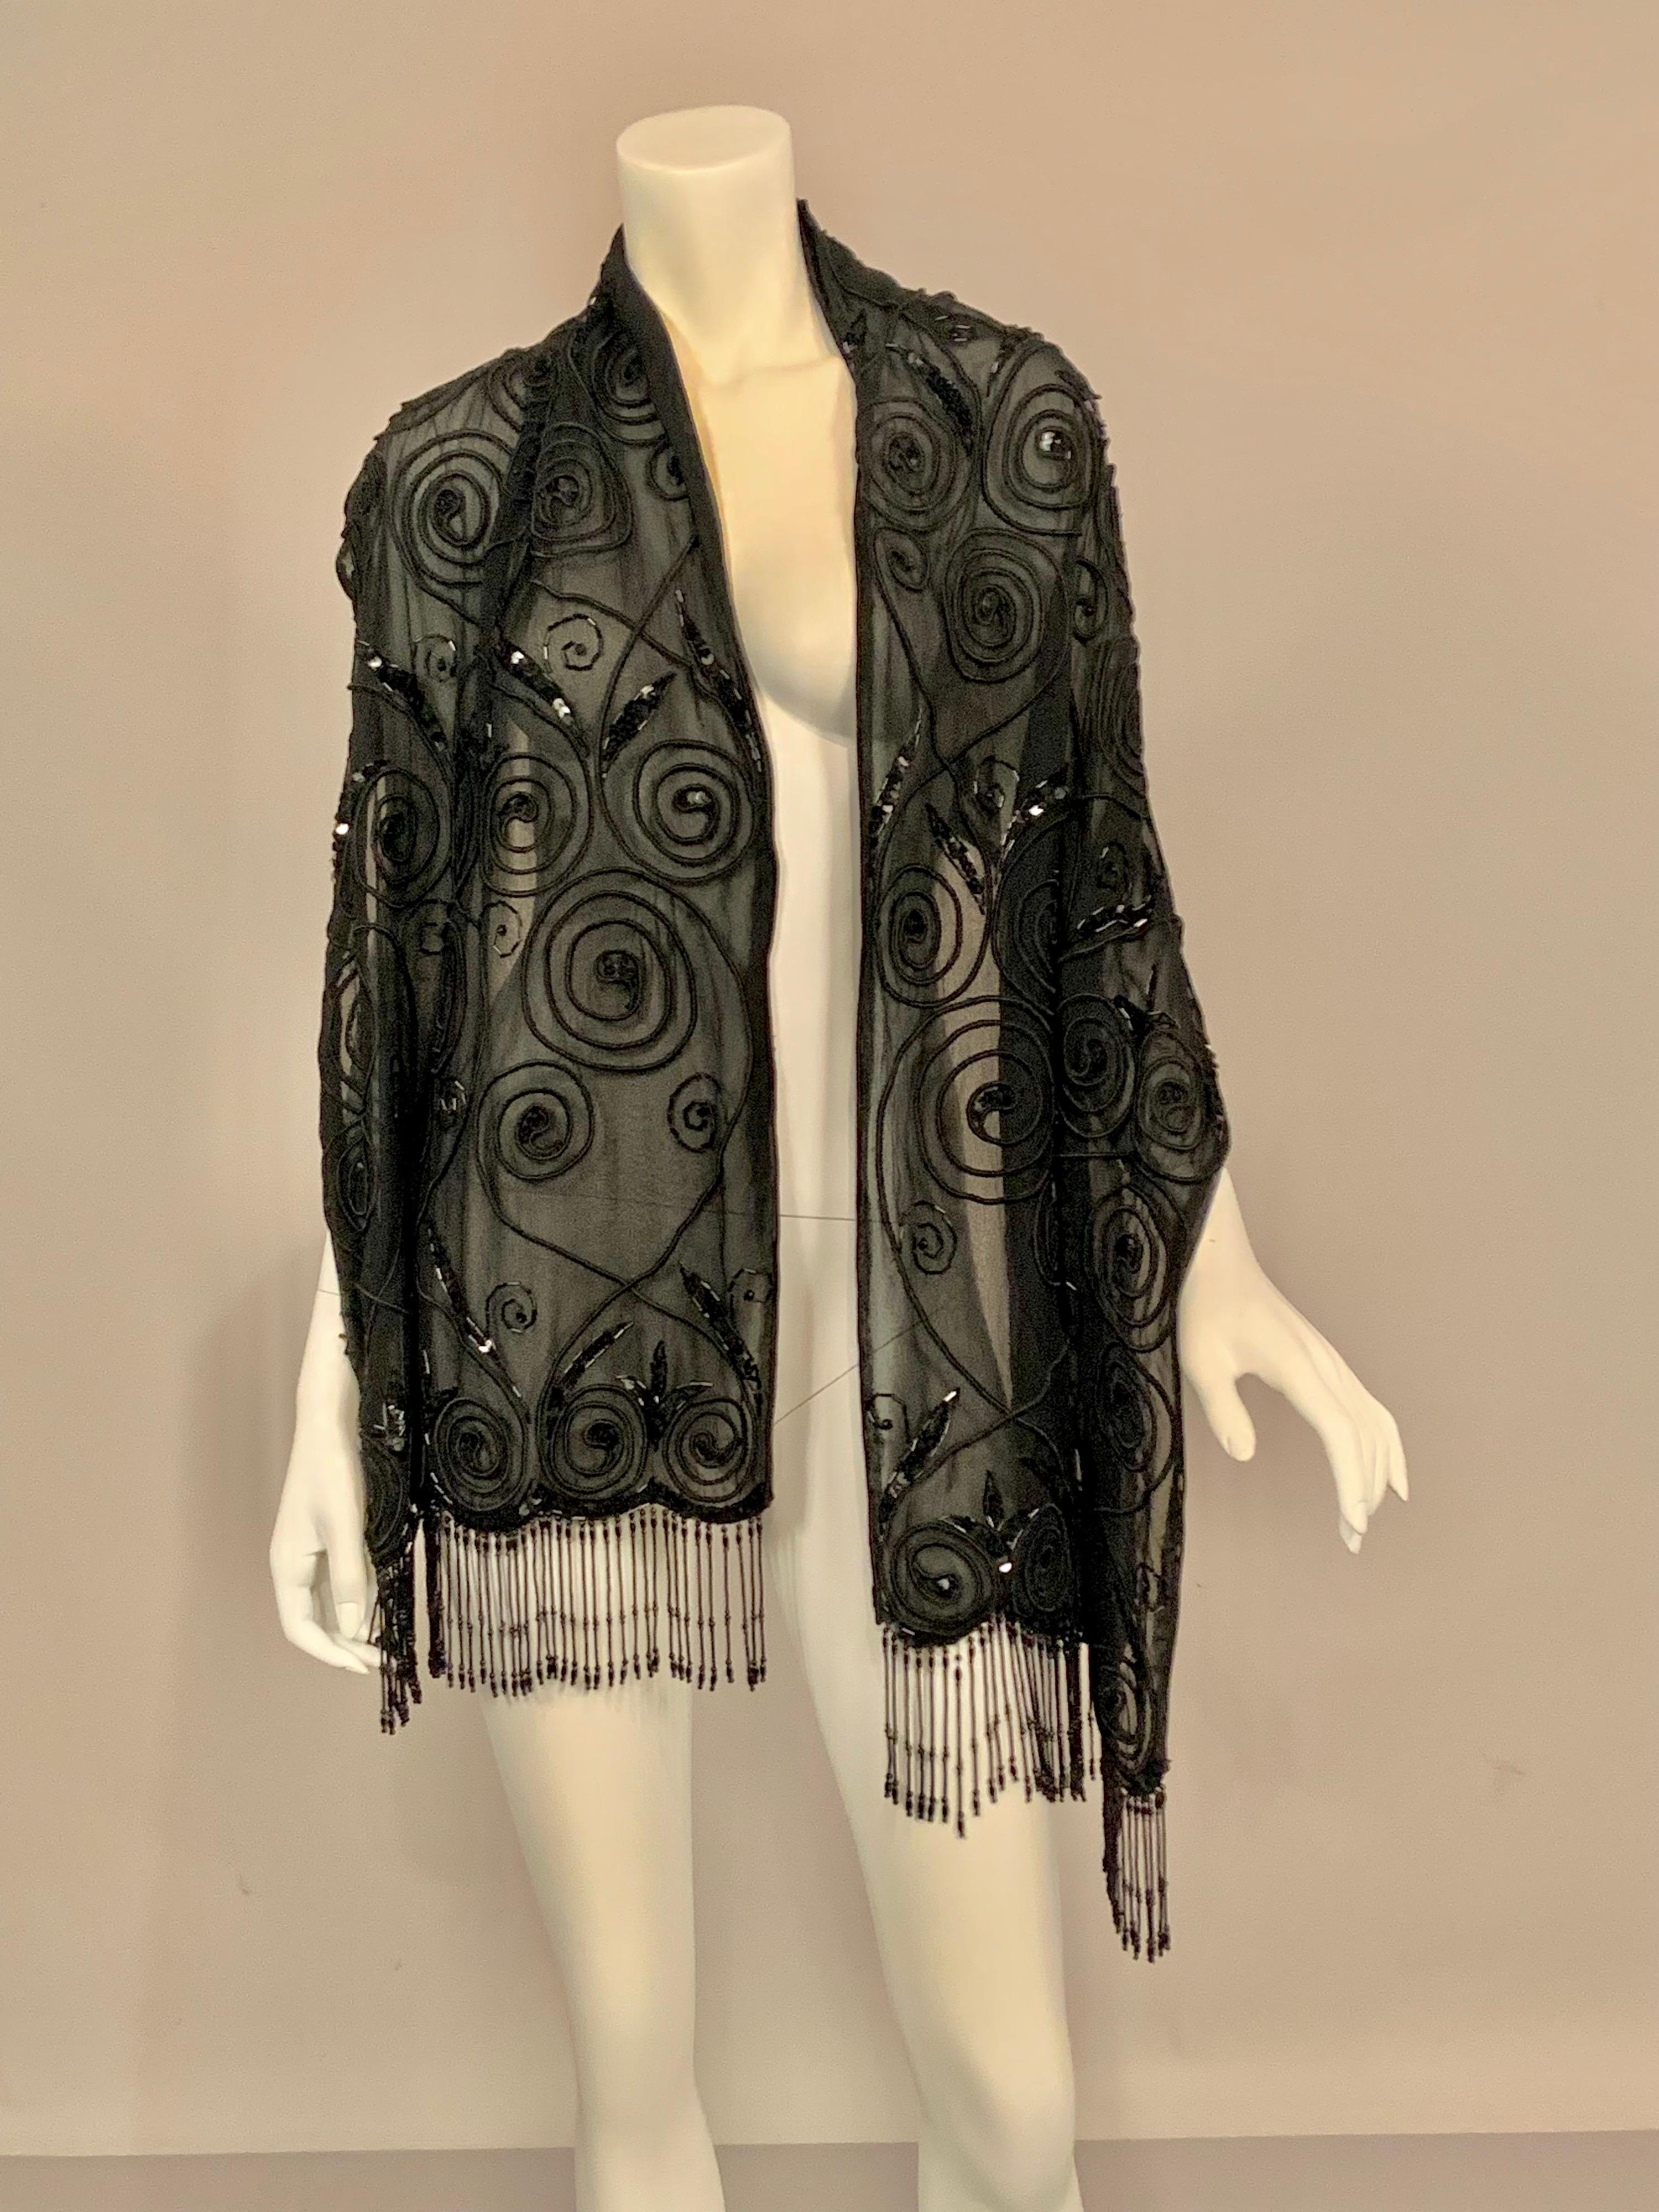 A scroll work of black silk soutache braid is enhanced by sequin and bugle bead motifs, as well as a fabulous beaded fringe.  All of this is stitched to black silk chiffon, which is lined with another layer of black silk chiffon.  The scarf or shawl